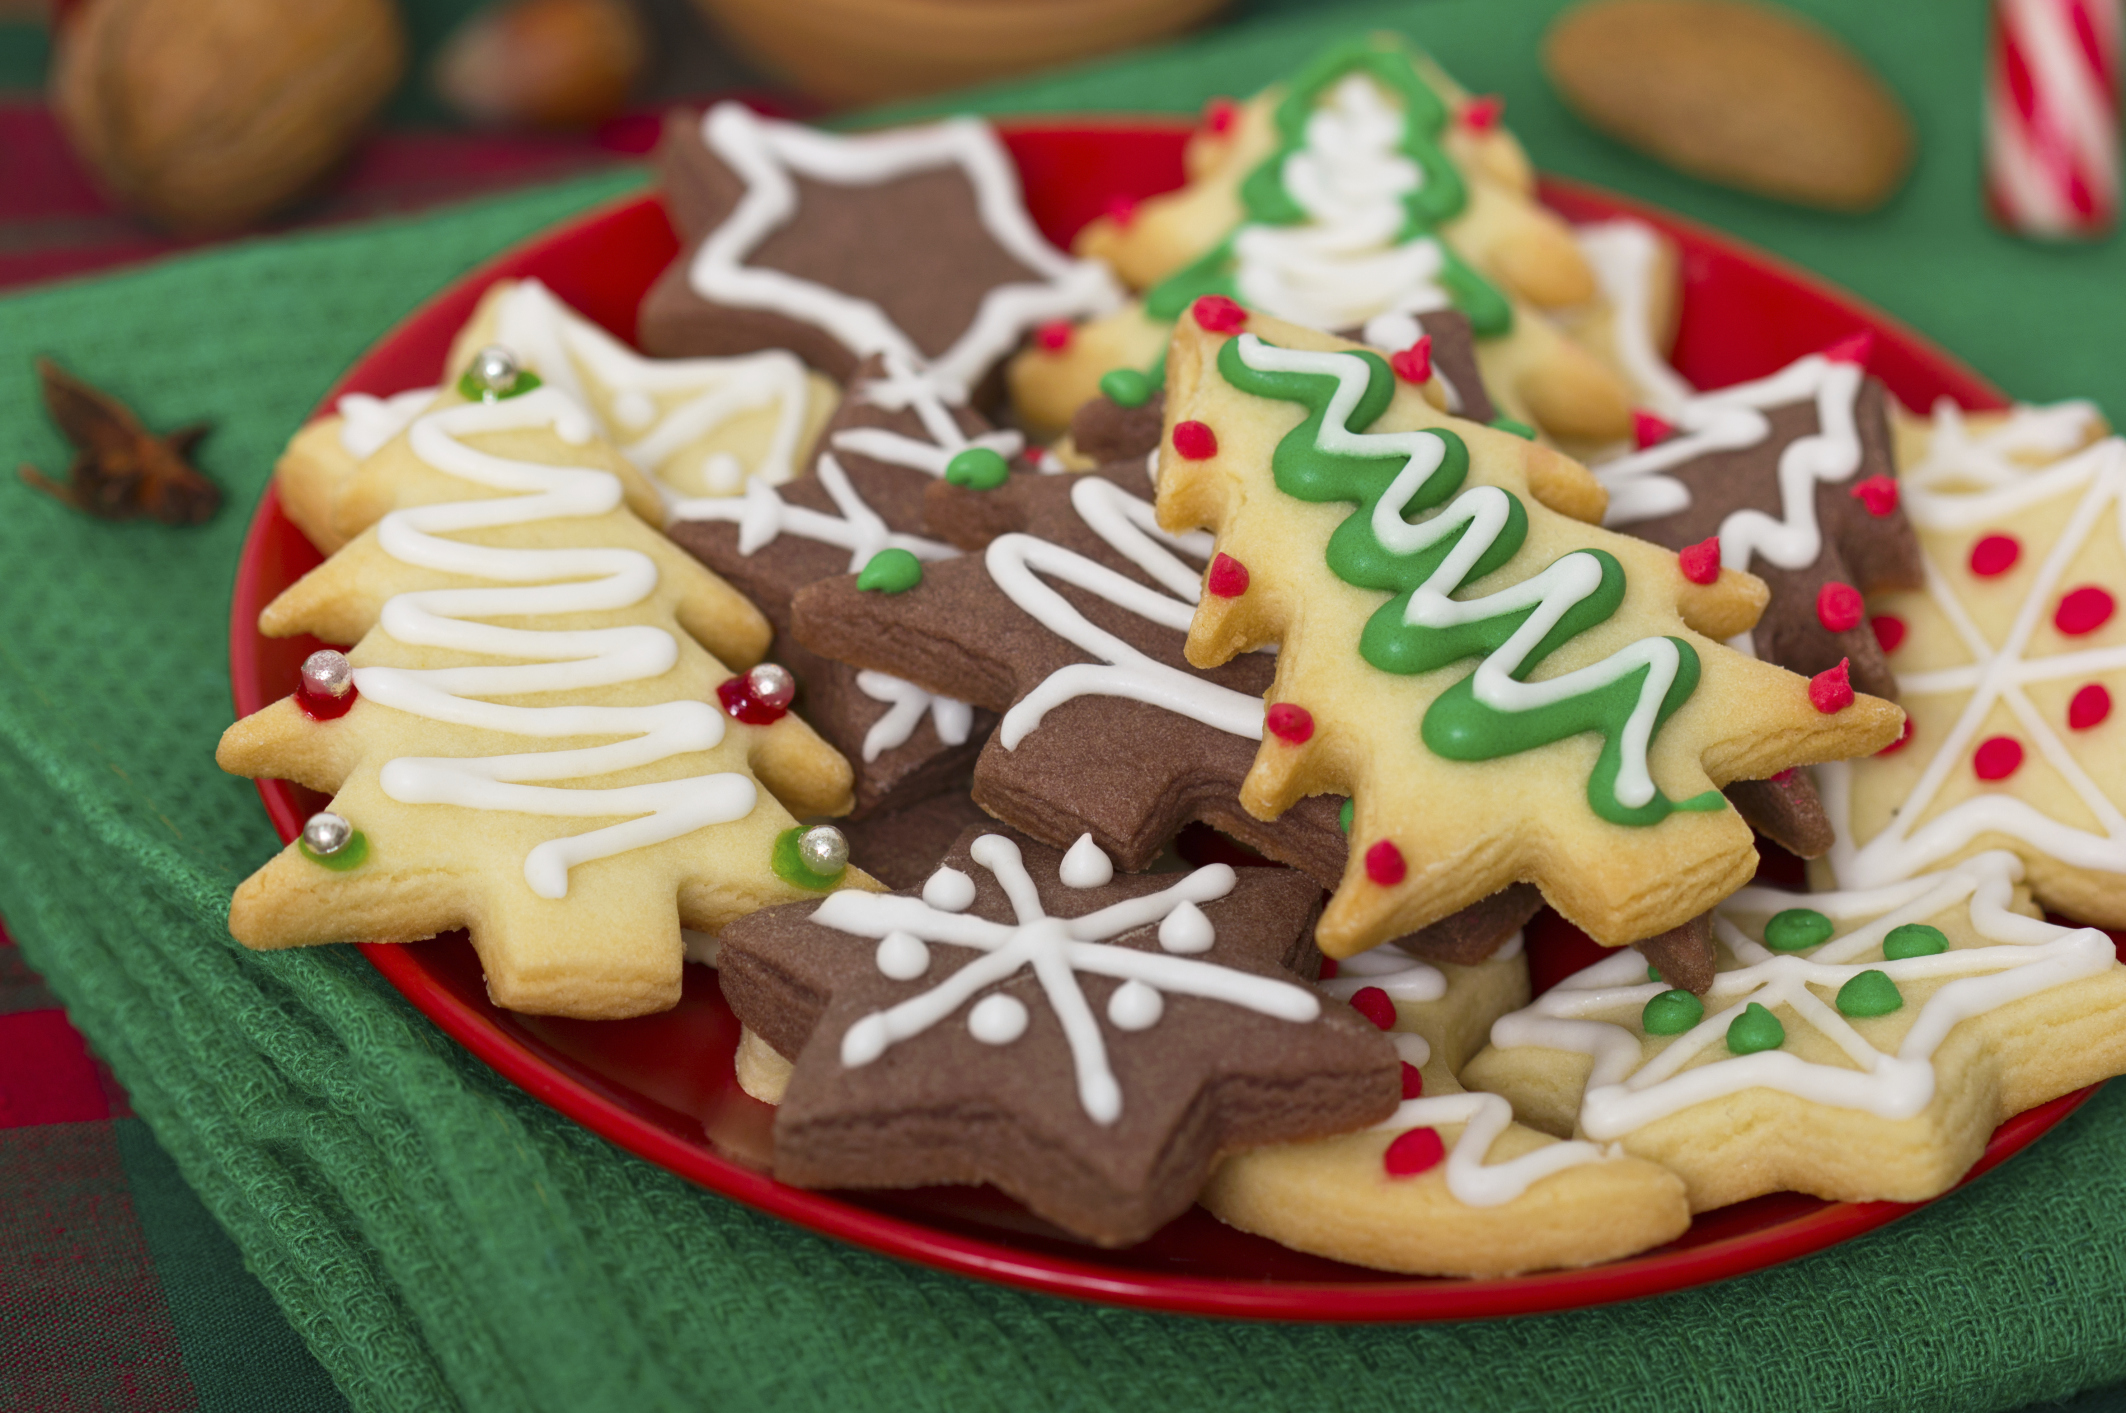 Creating Christmas Traditions With Your Team